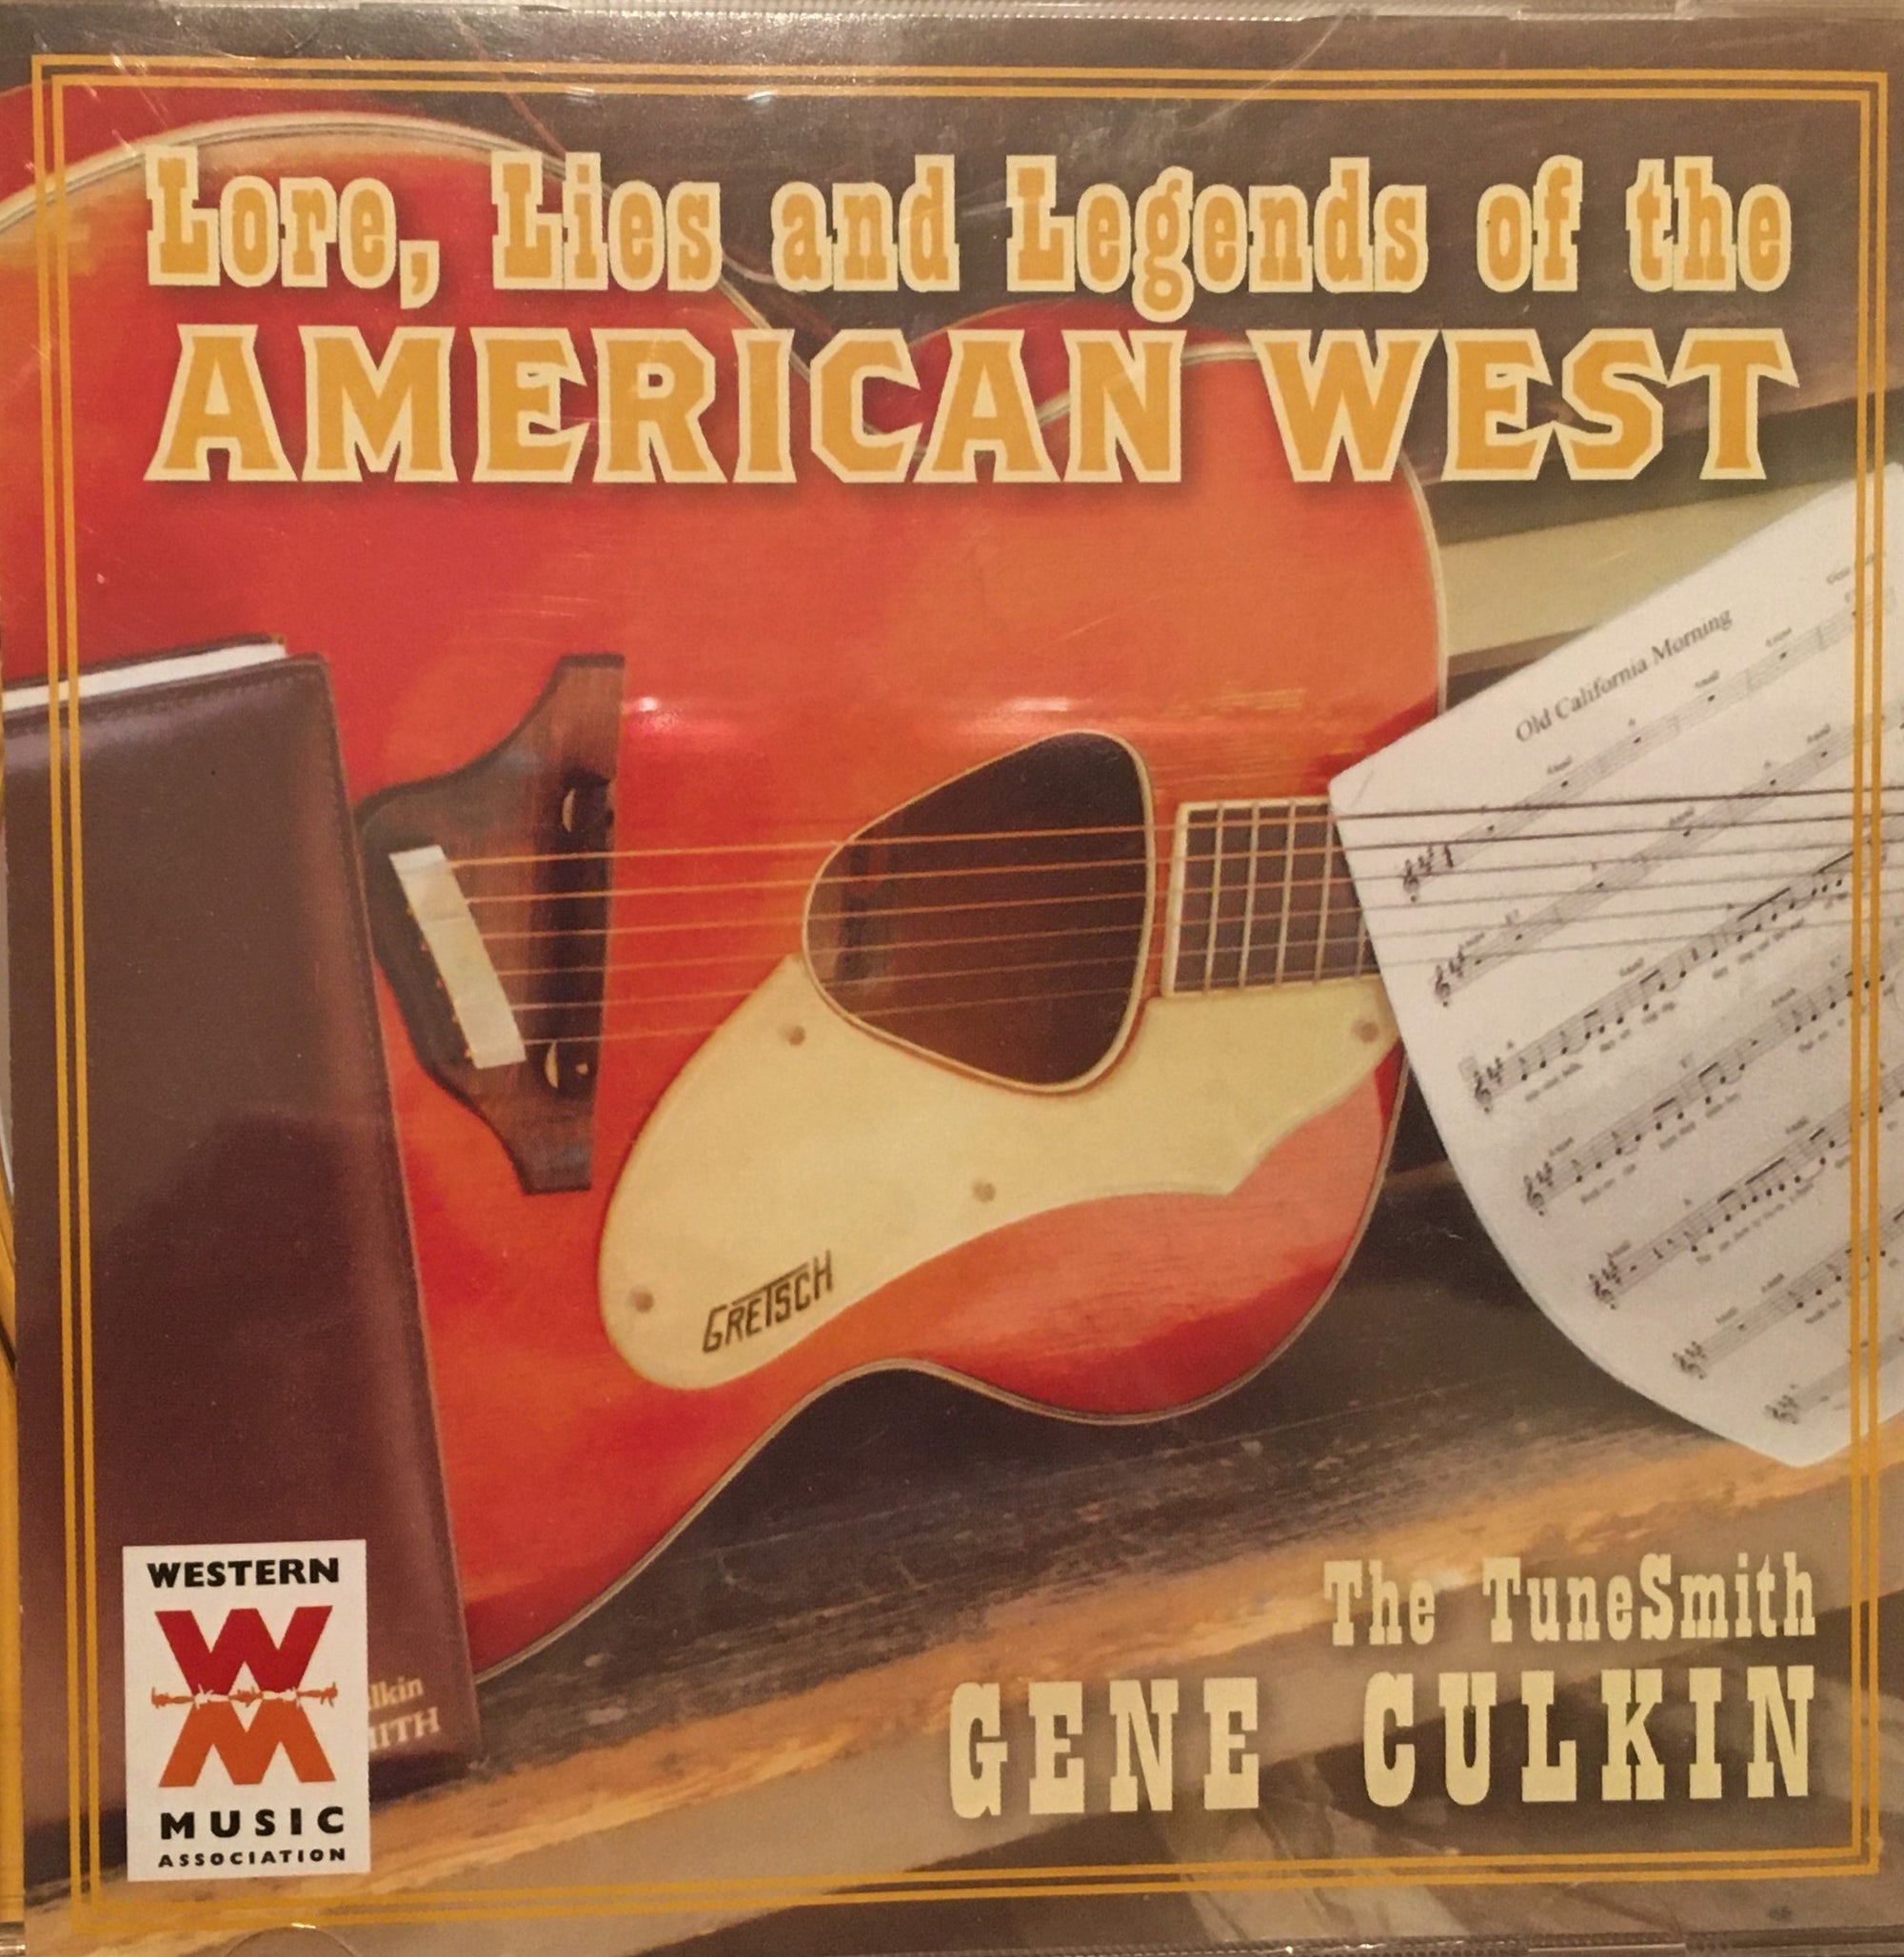 CD Lore, Lies and Legends of the American West By Gene Culkin